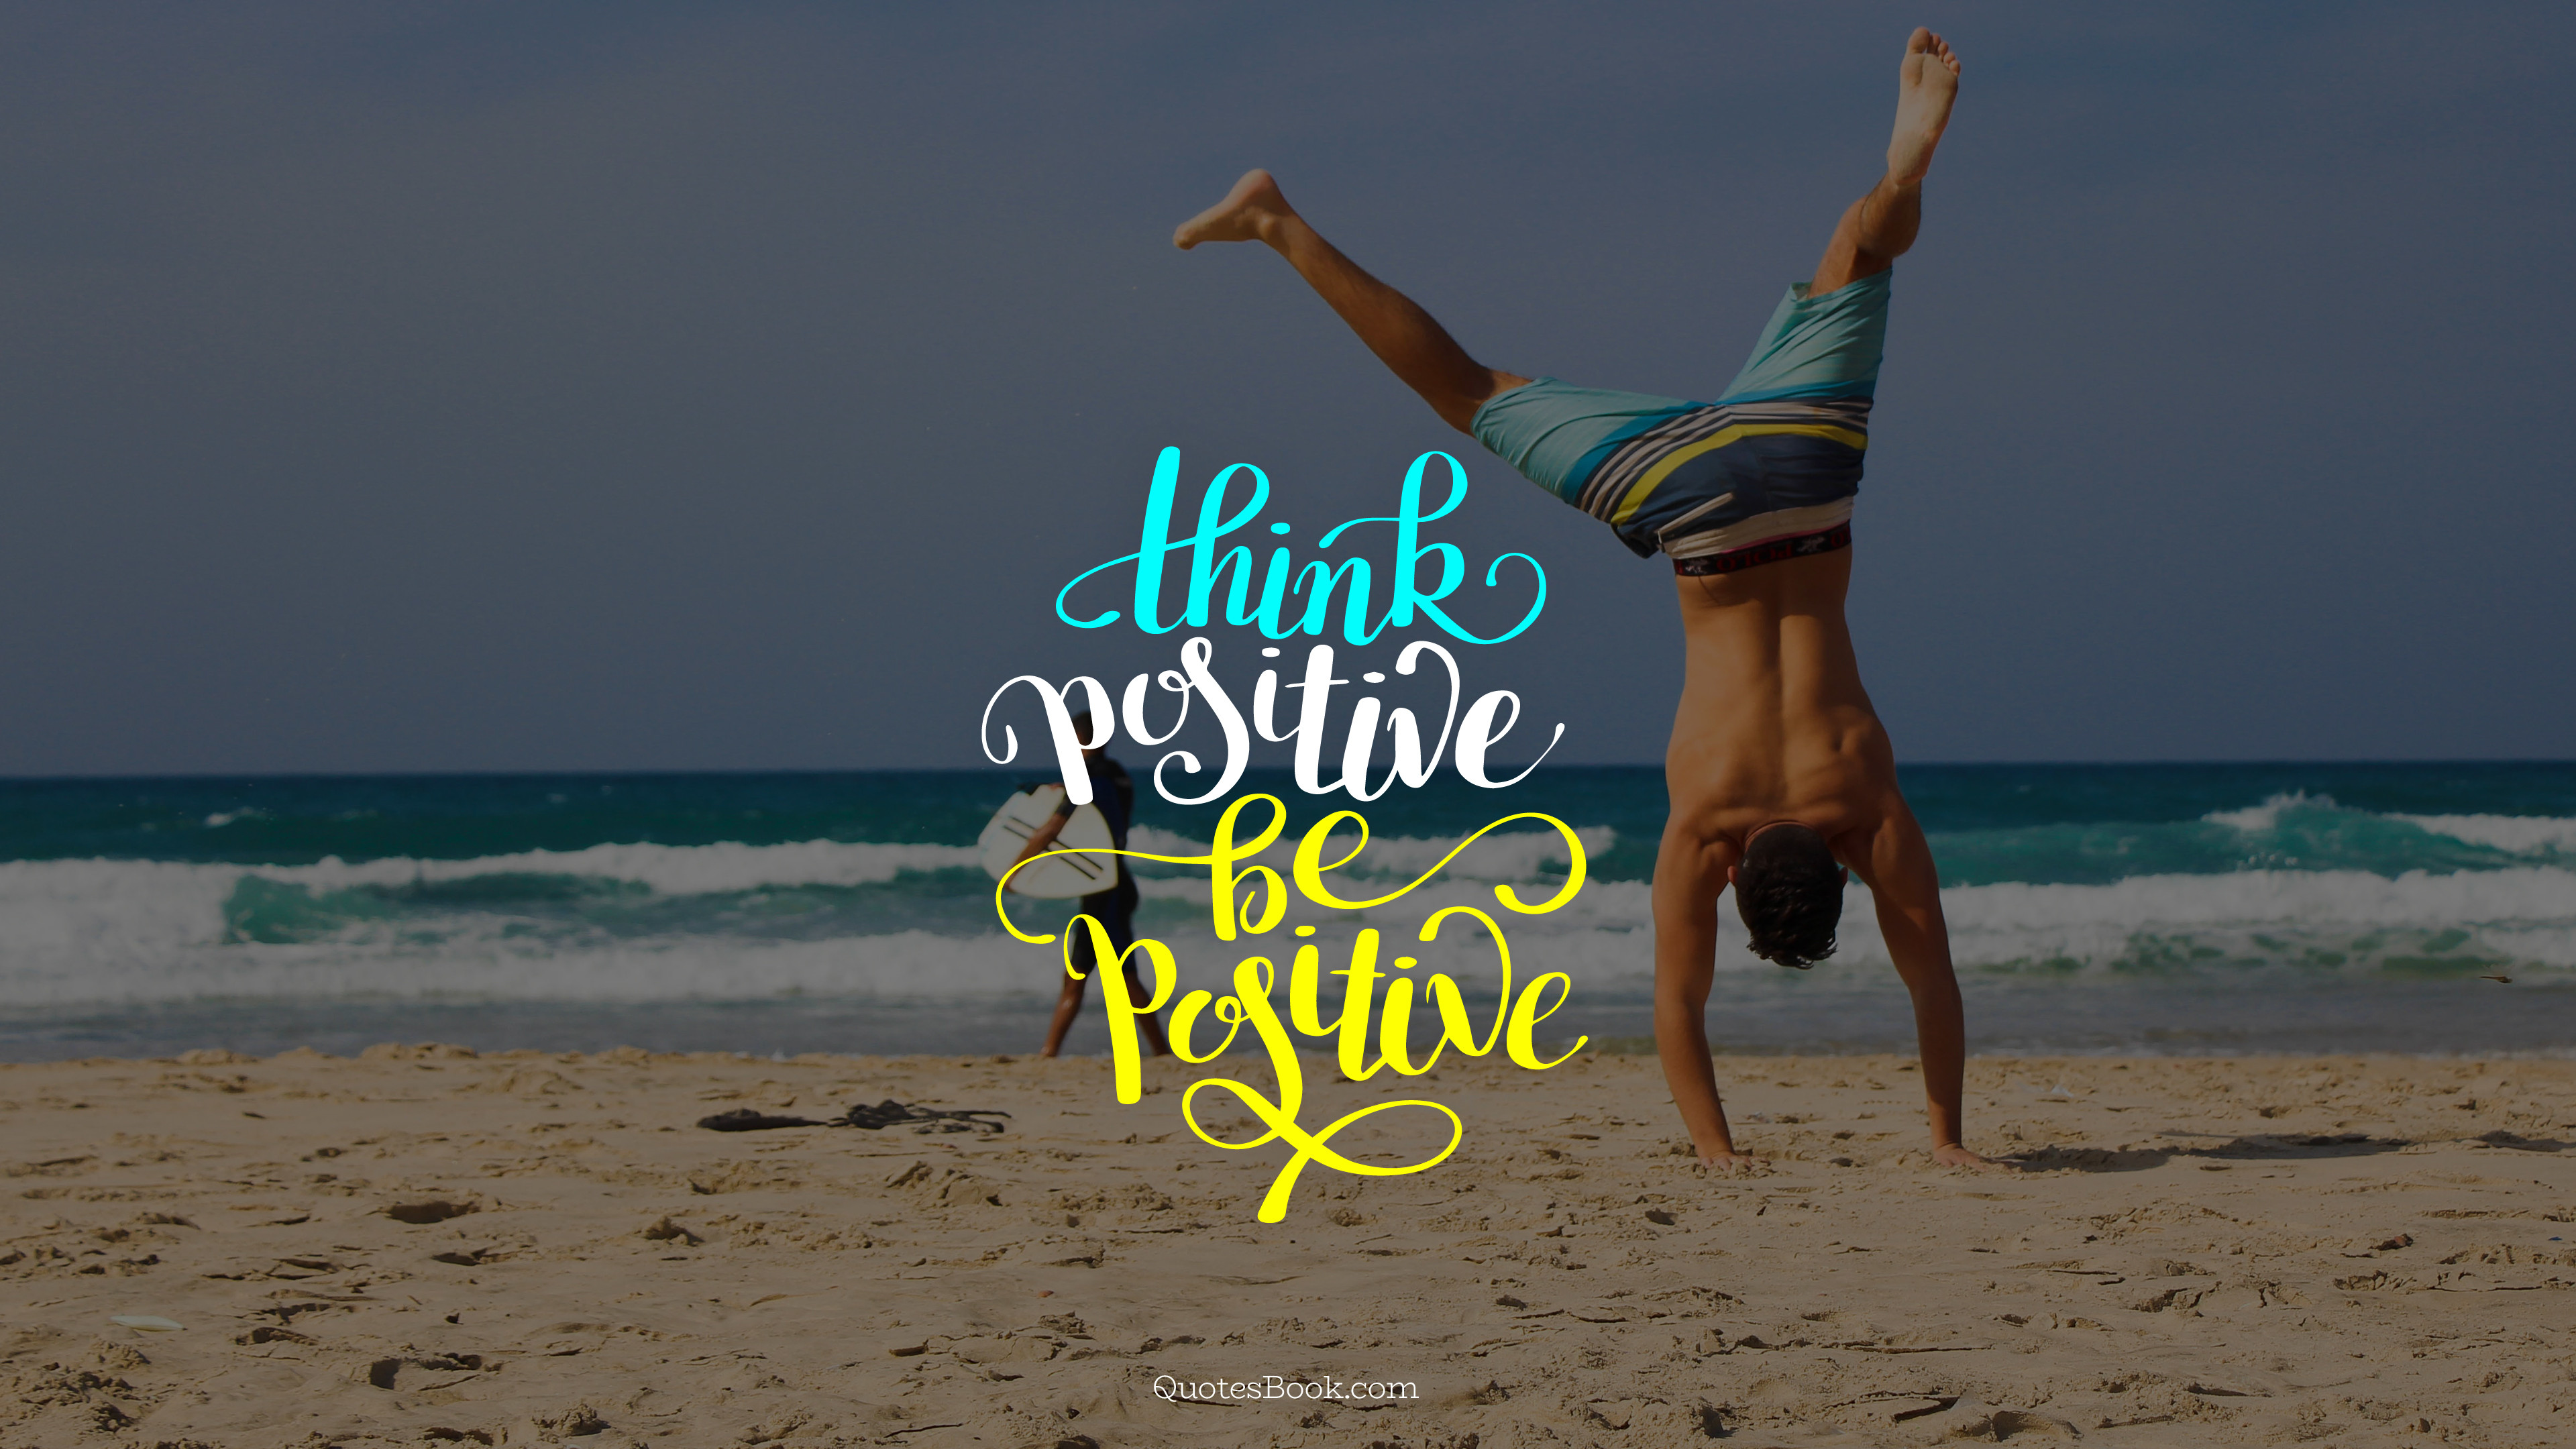 Think positive be positive - Page 22 - QuotesBook